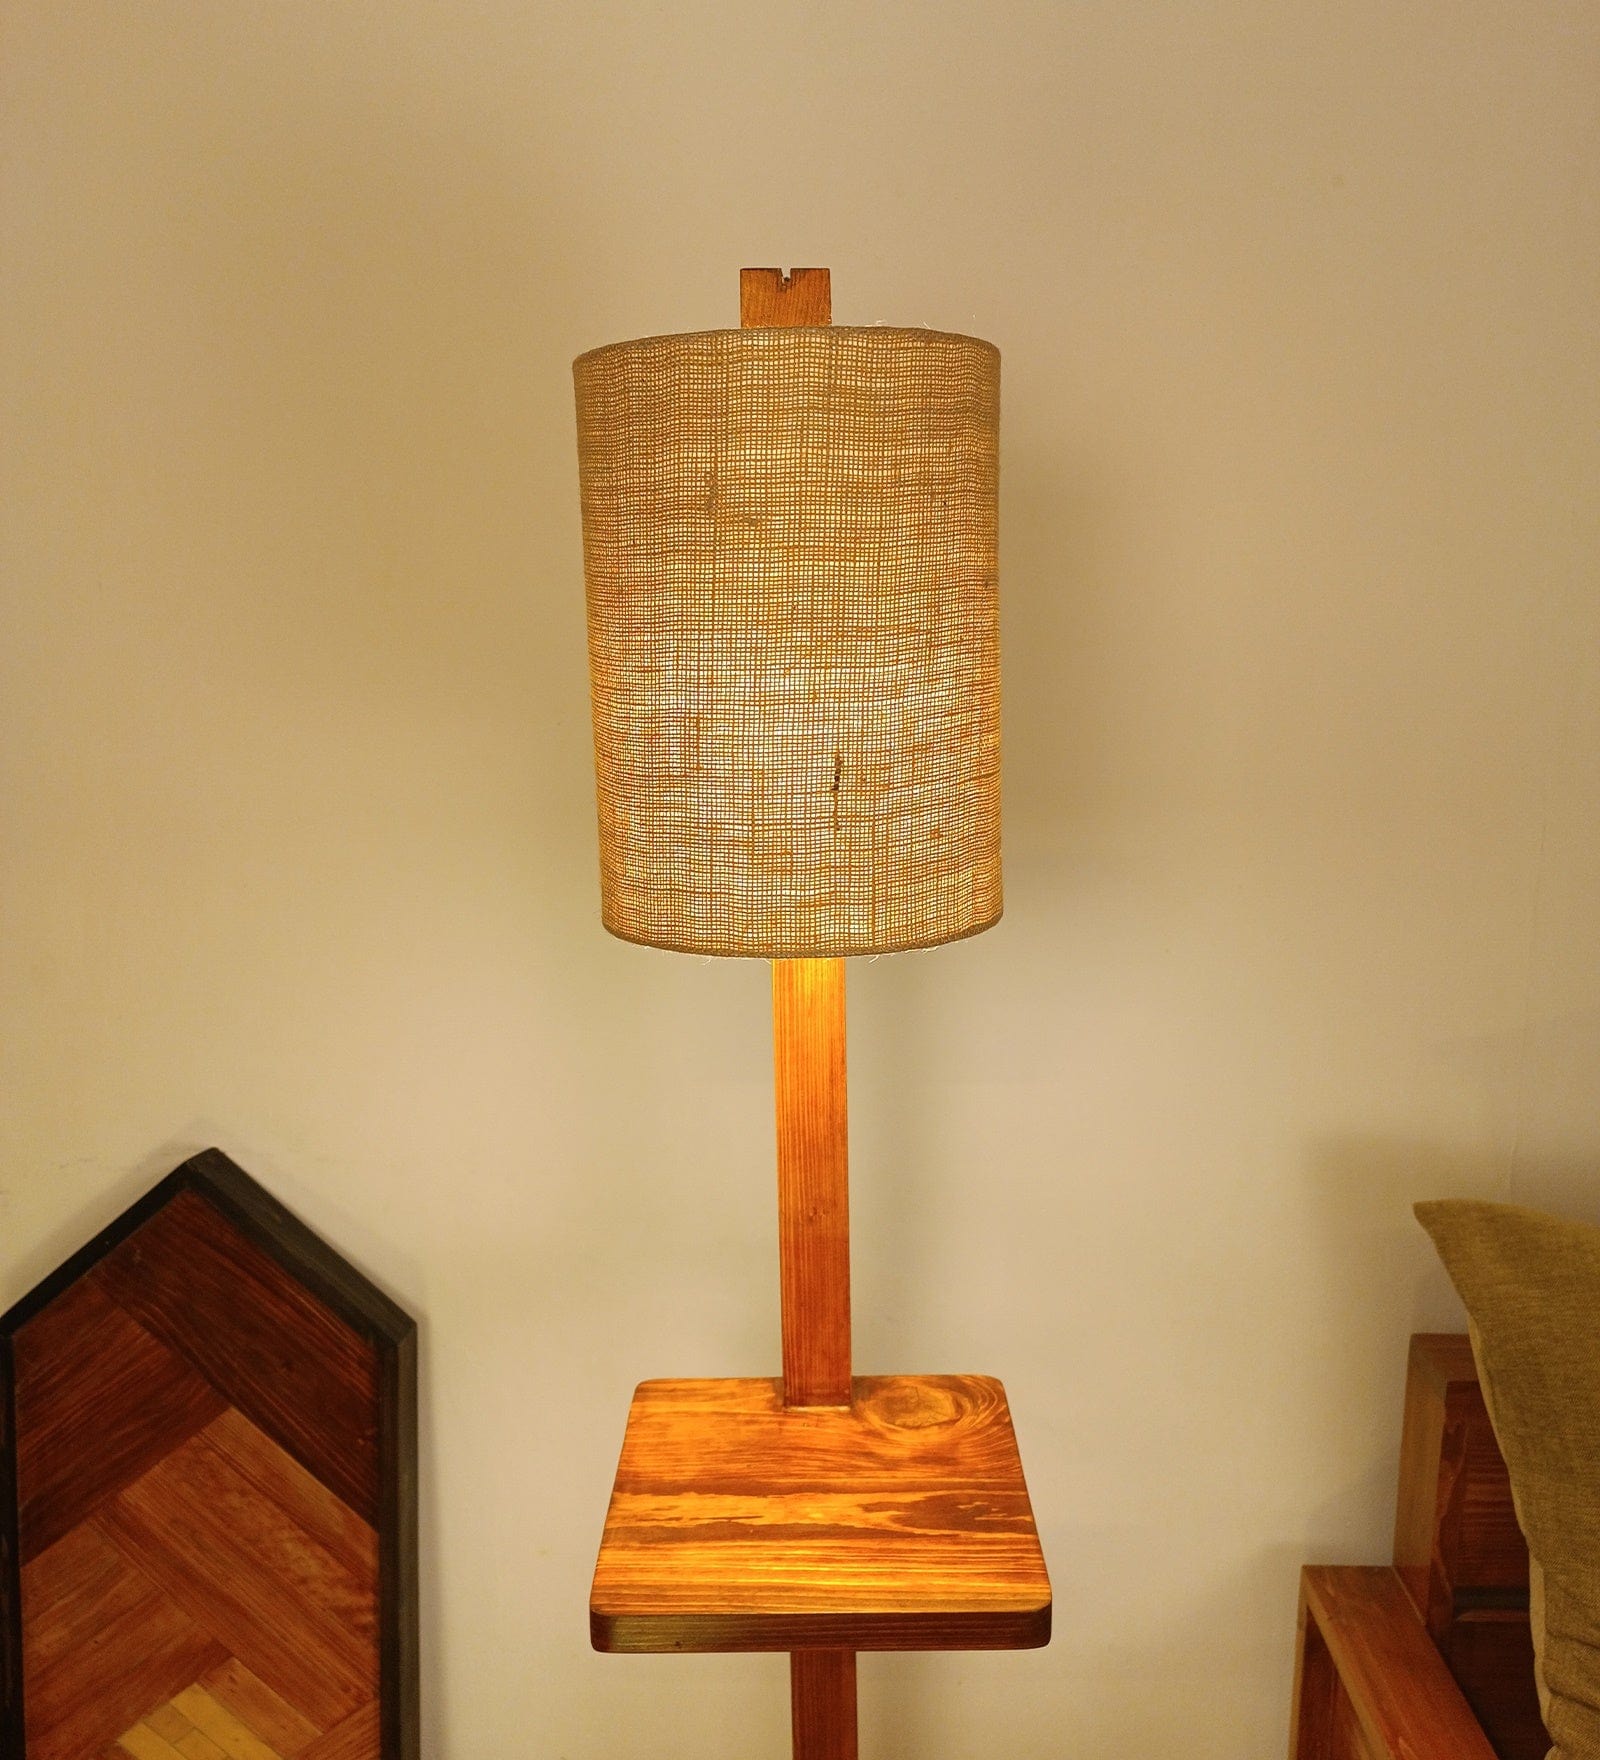 Andre Wooden Floor Lamp with Brown Base and Jute Fabric Lampshade (BULB NOT INCLUDED)